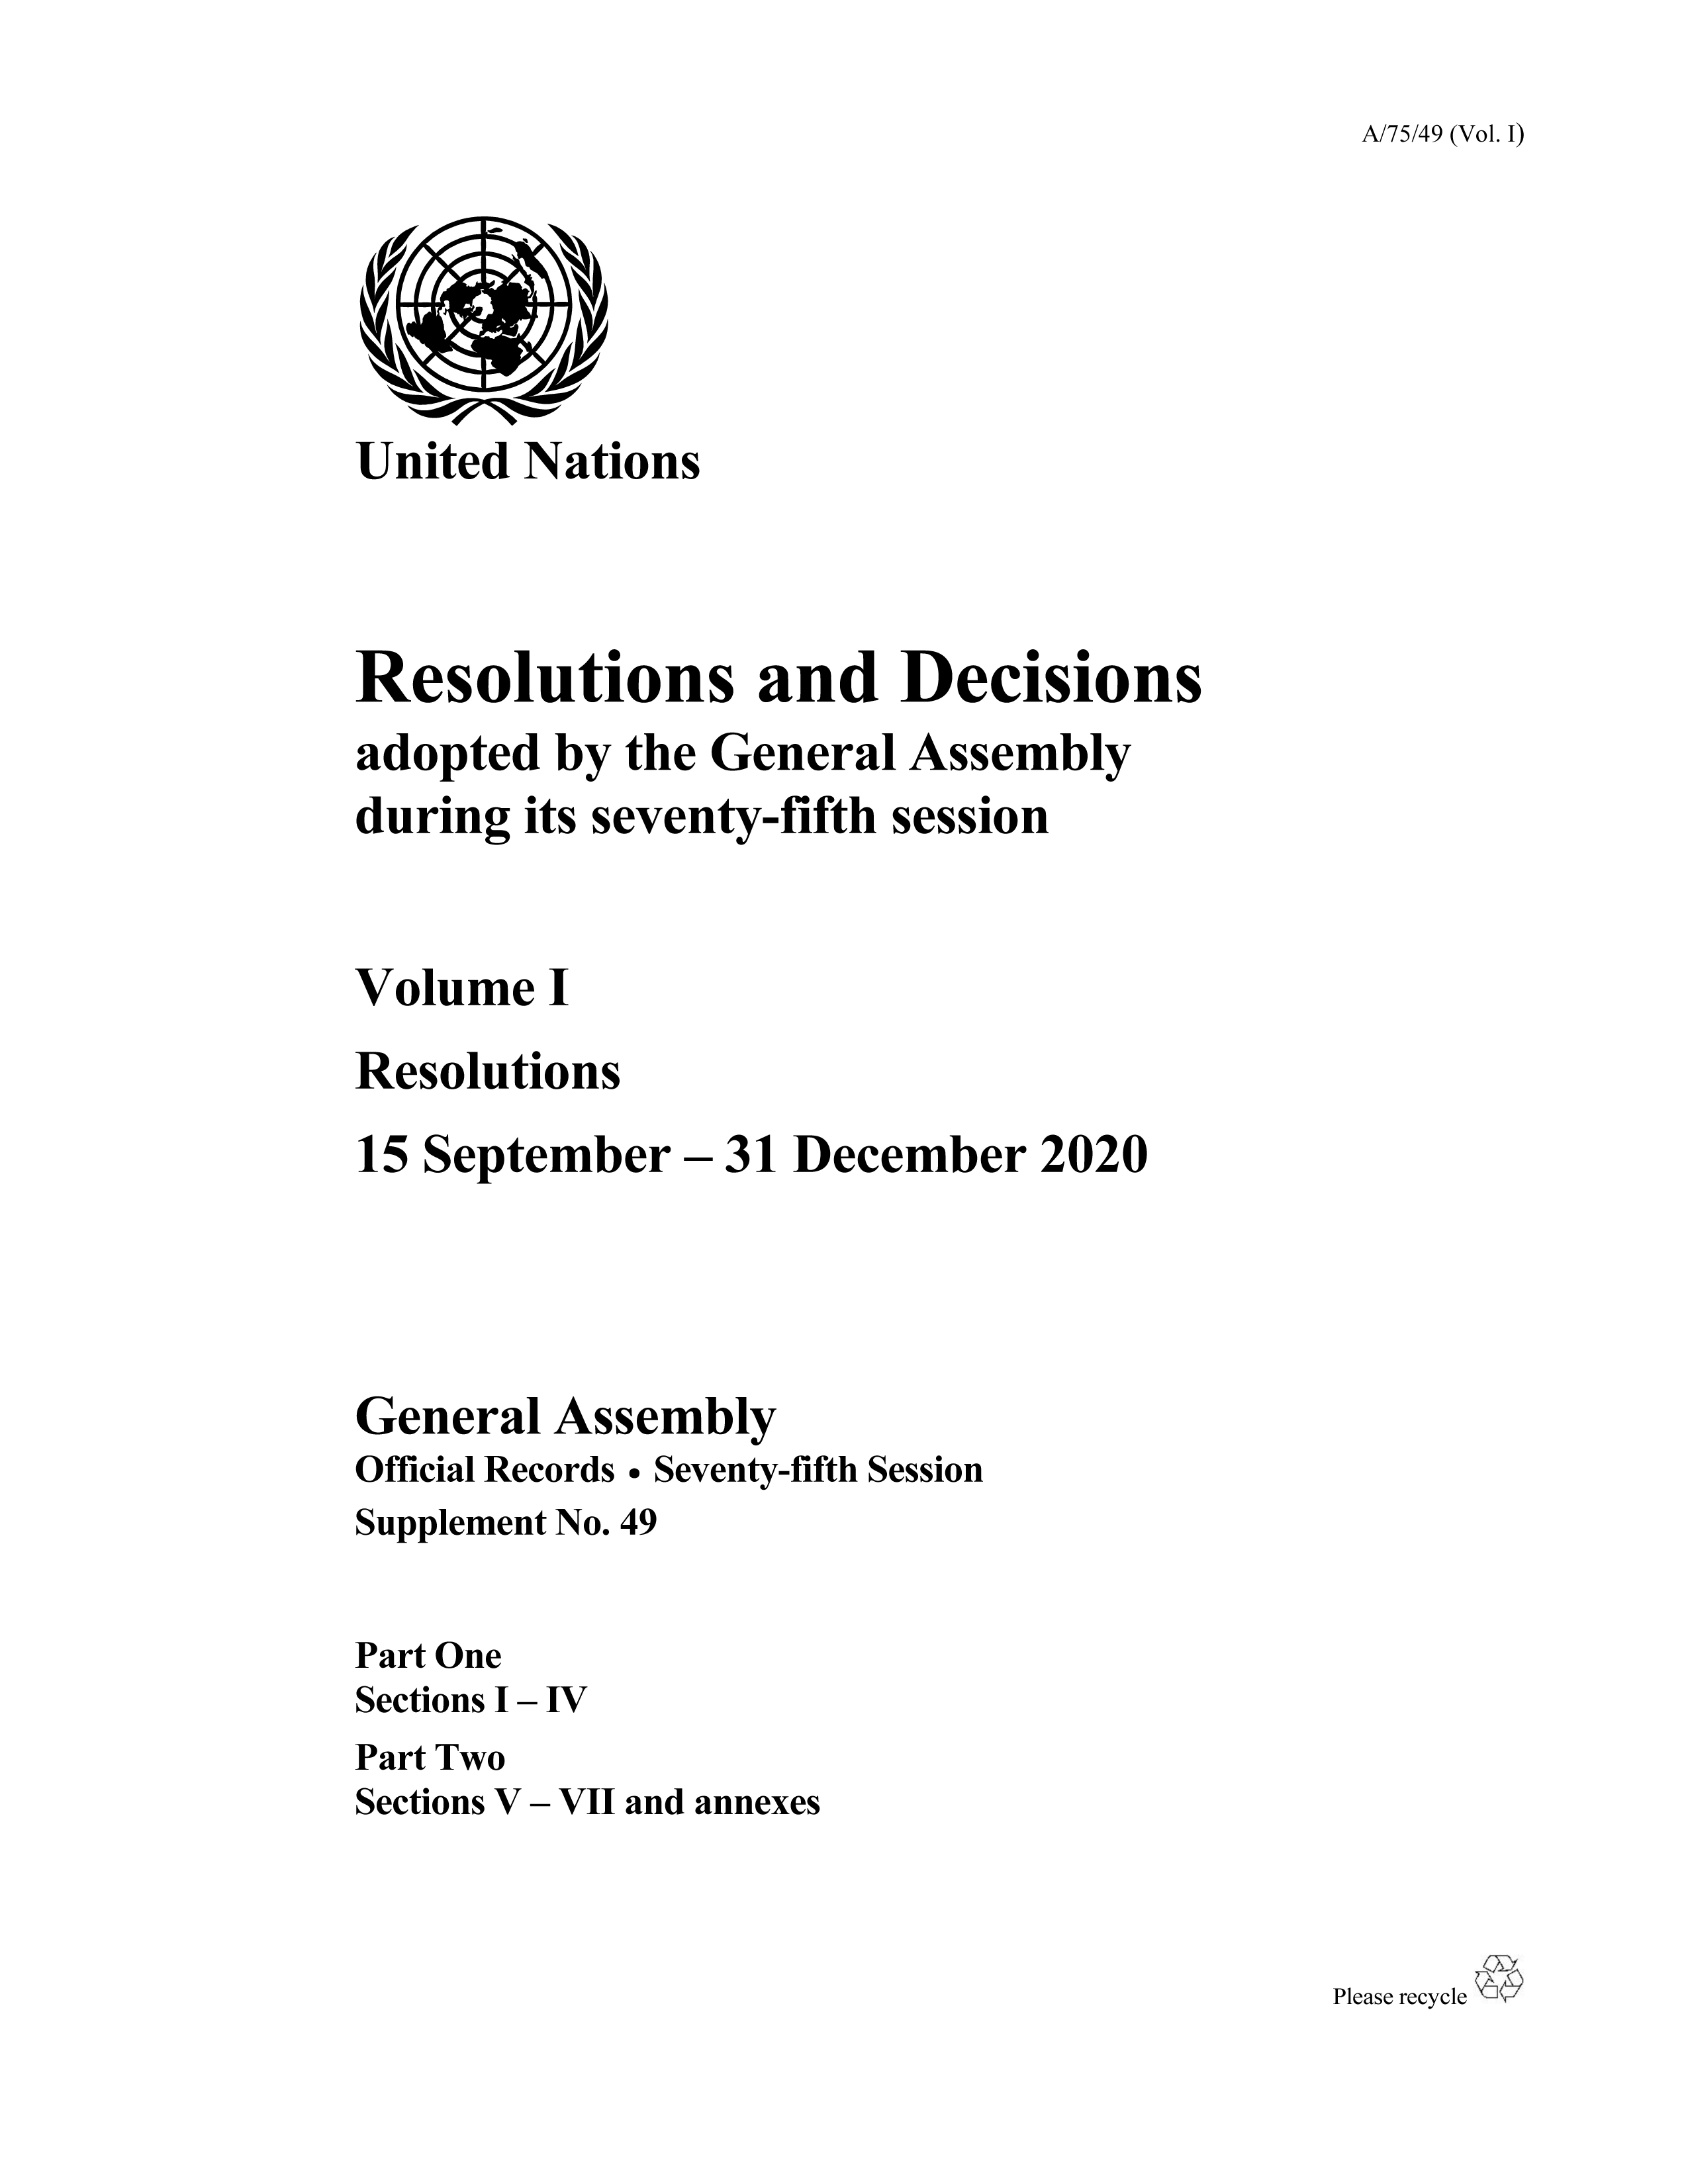 image of Resolutions and Decisions Adopted by the General Assembly During its Seventy-fifth Session: Volume I